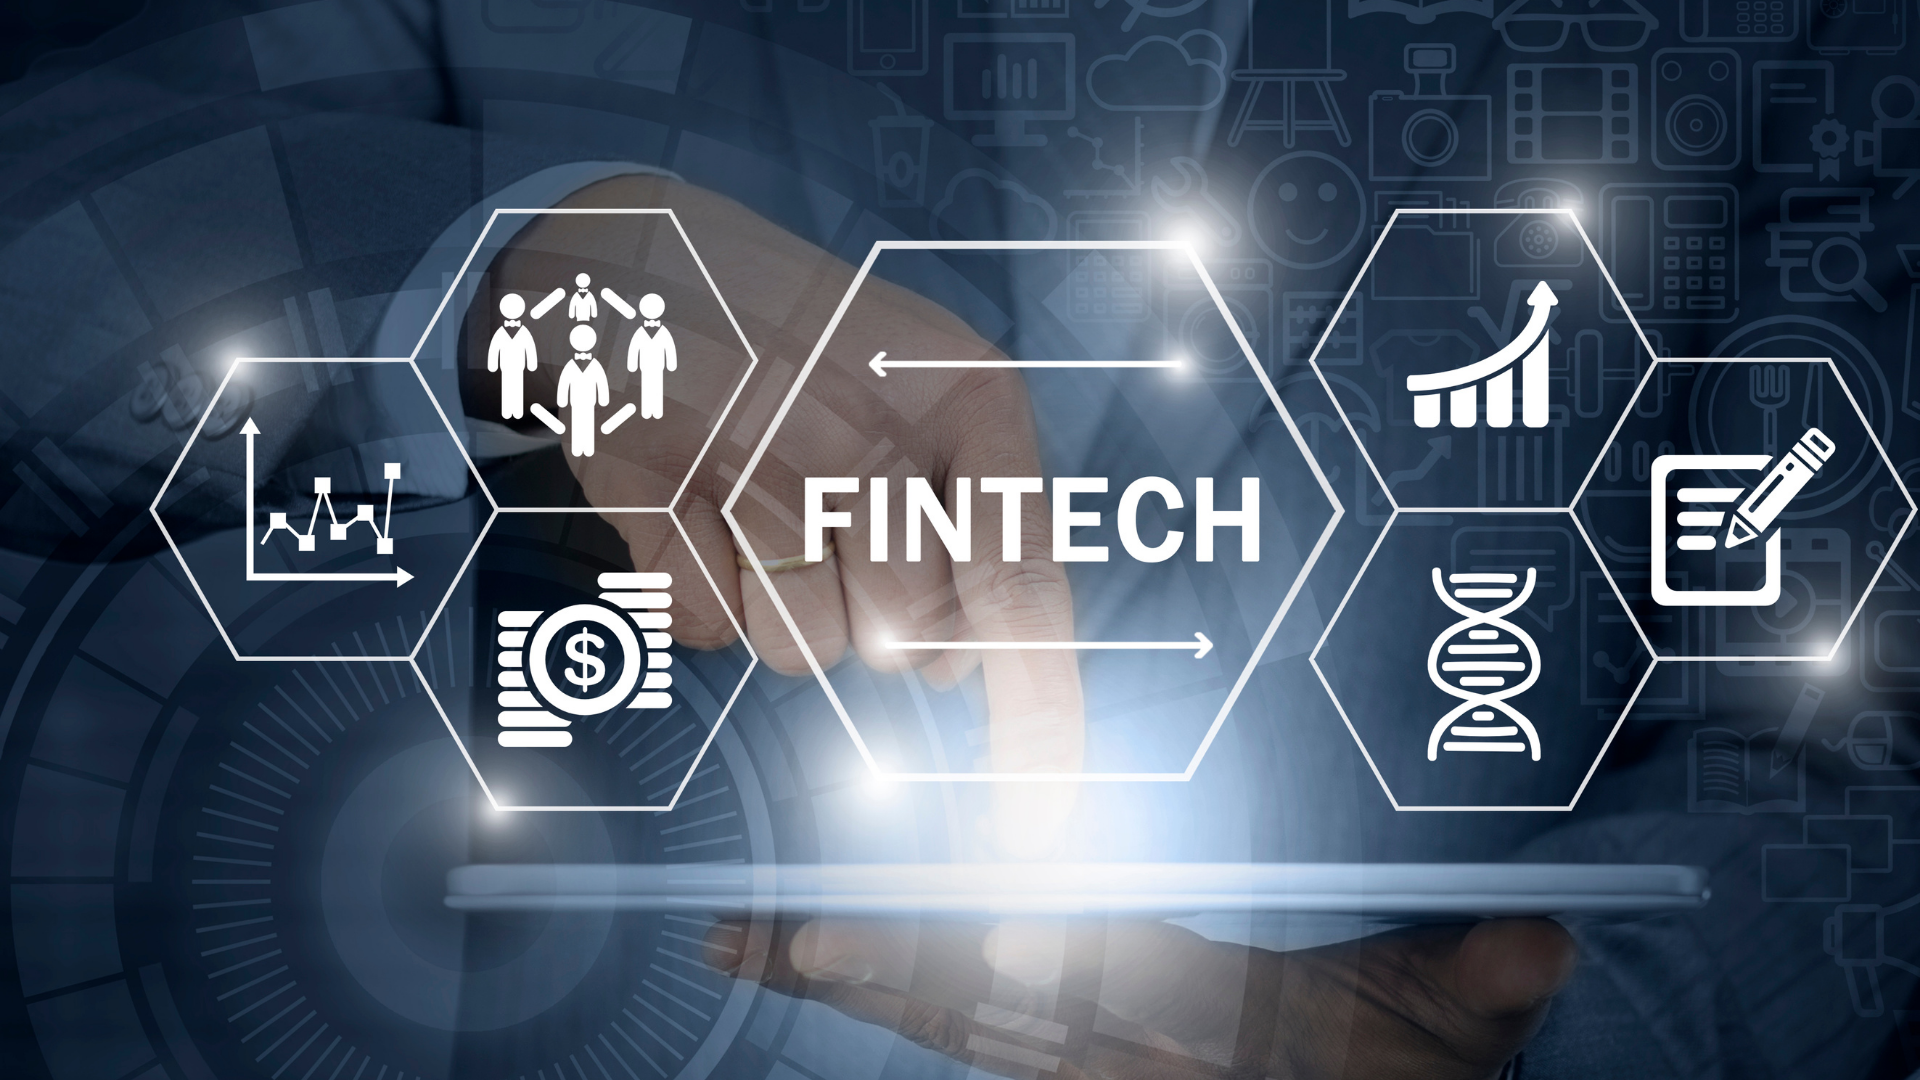 Global Law Experts   Fintech Problems In Which Region and Country